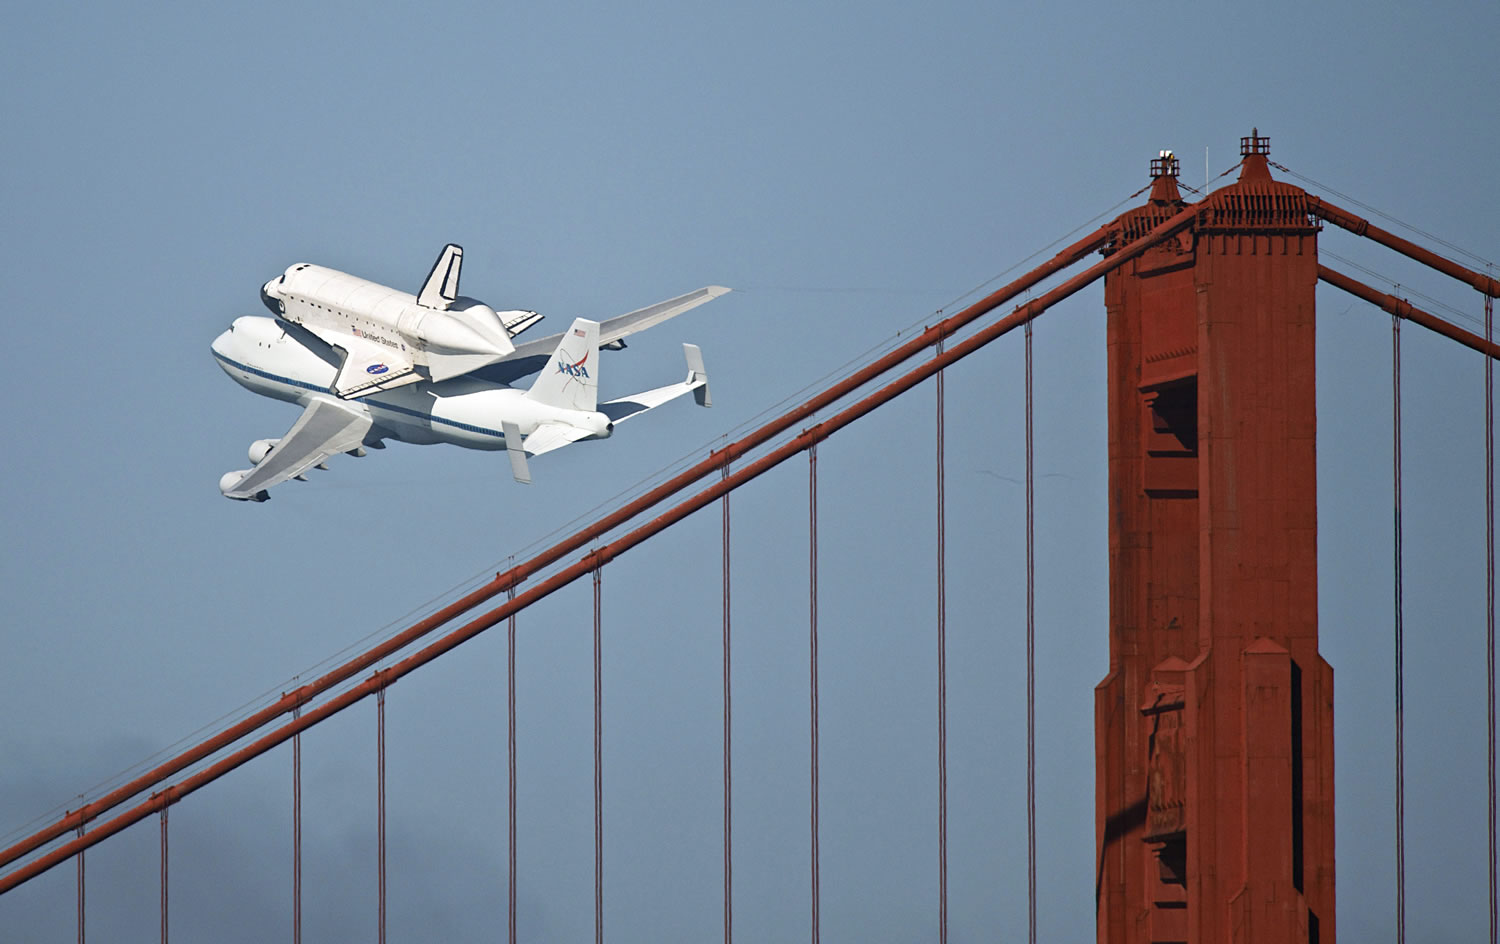 The space shuttle Endeavour passes over the Golden Gate Bridge in San Francisco, Friday.